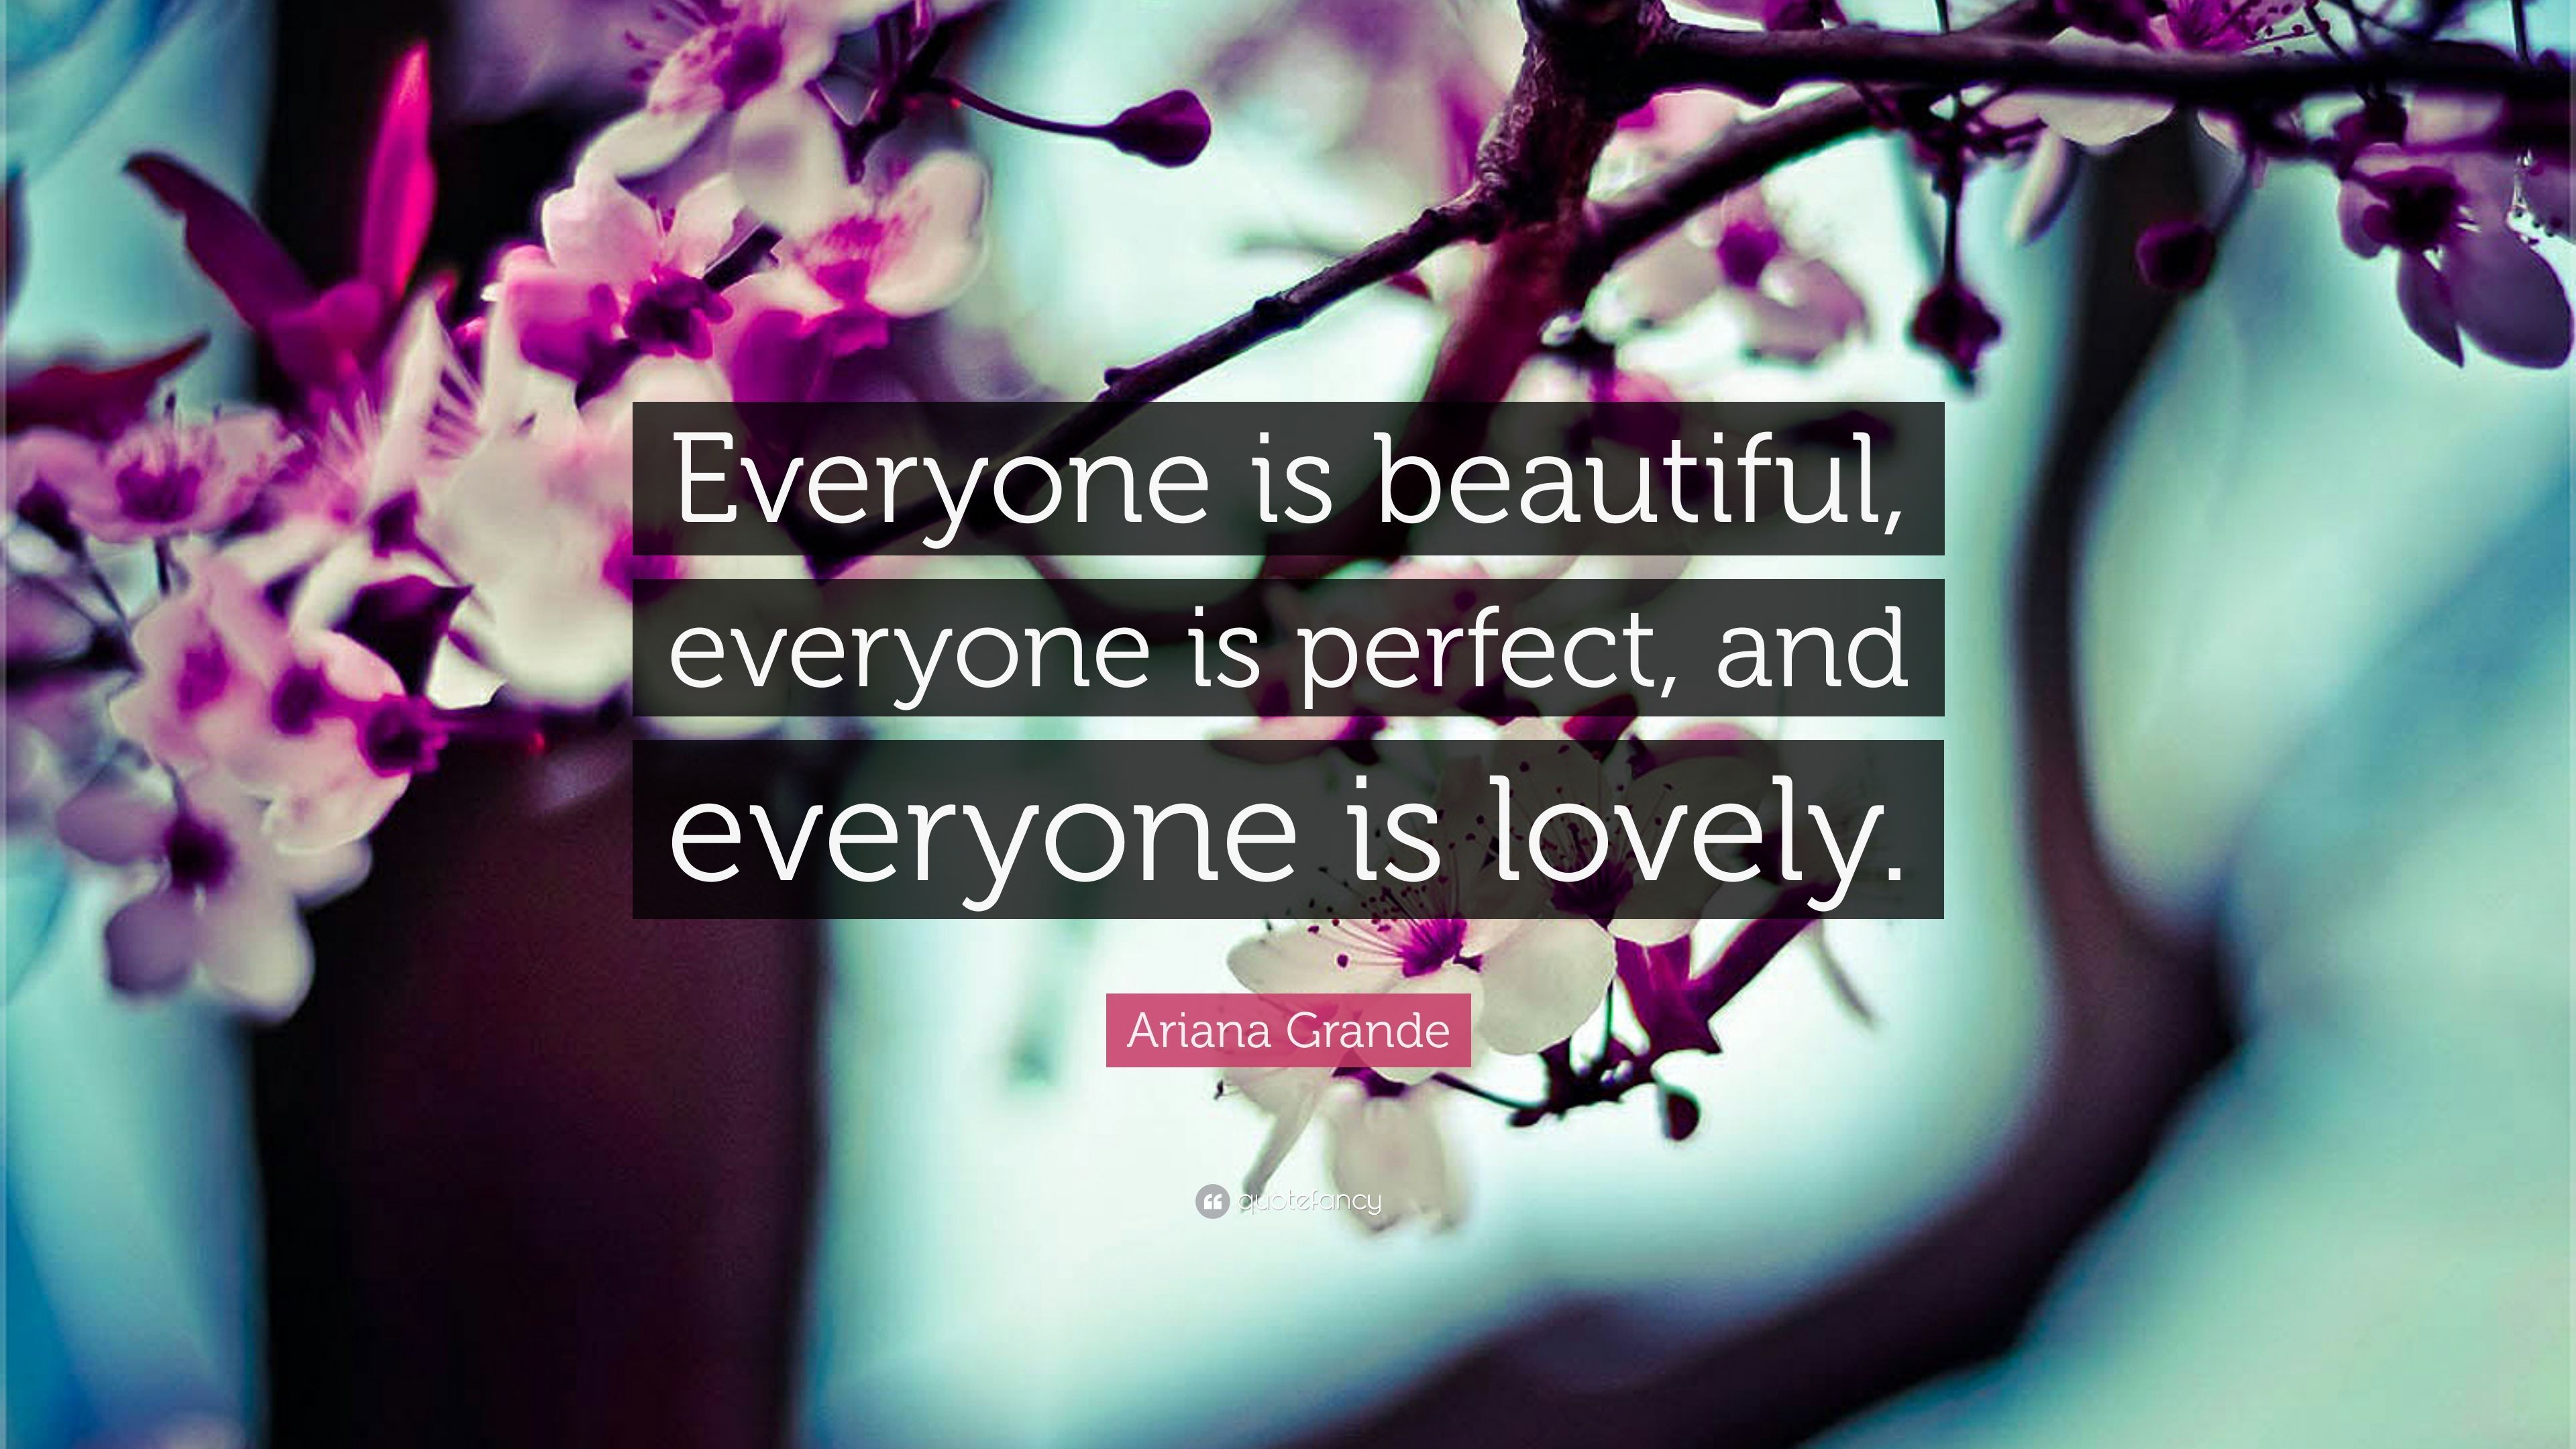 Ariana Grande Quote: “Everyone is beautiful, everyone is perfect